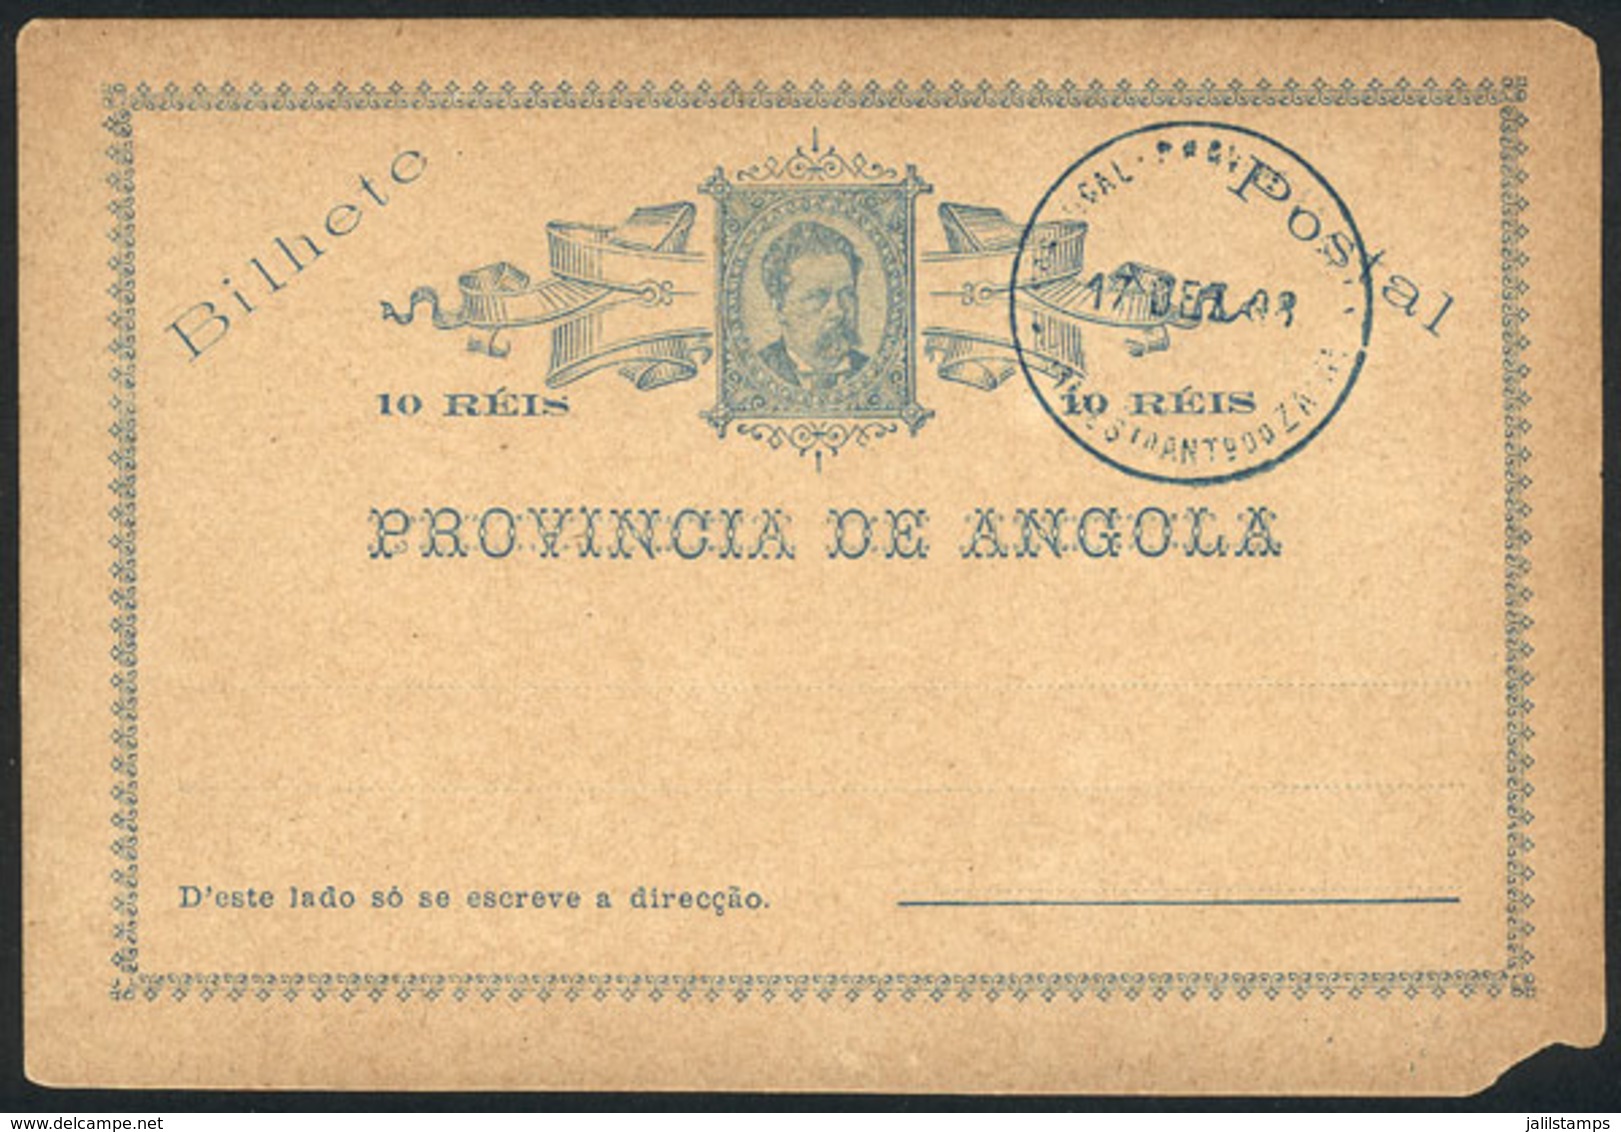 ANGOLA: 10Rs. Postal Card, Unused, Cancelled To Order, Minor Defect, Rare! - Angola